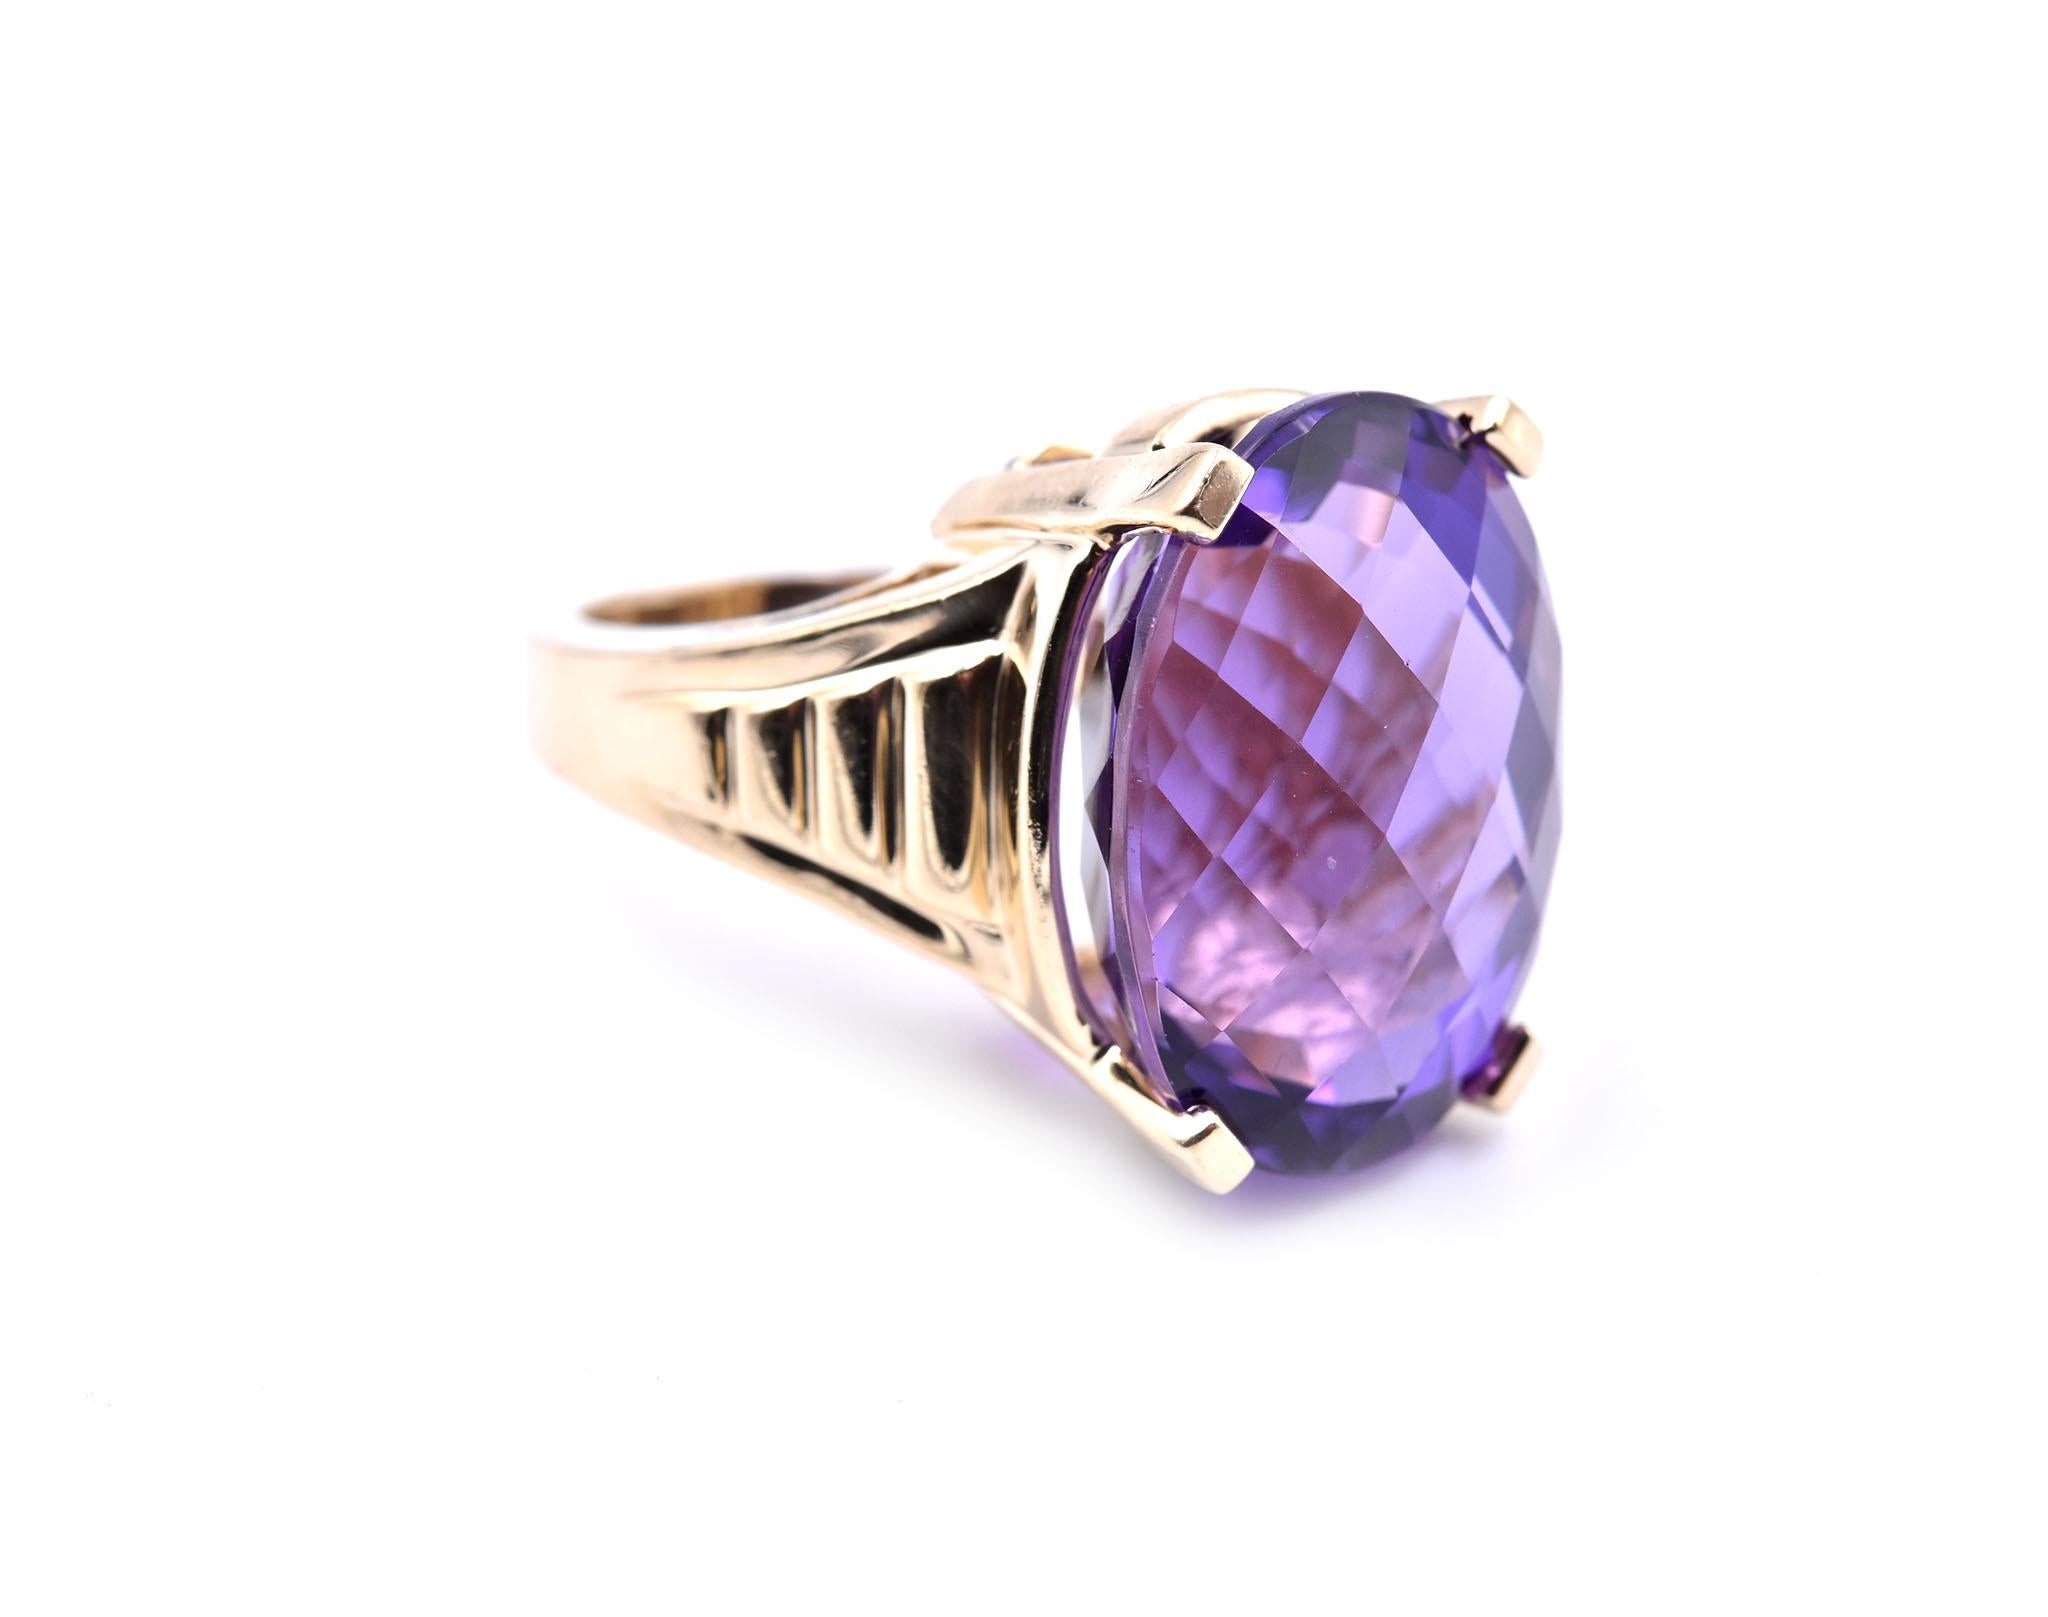 Designer: custom design
Material: 14k yellow gold
Amethyst: 1 oval cushion checkerboard cut= 20.40ct
Ring size: 5 ½ (please allow two additional shipping days for sizing requests)
Dimensions: ring top is 20.11mm by 15.07mm
Weight: 12.5 grams
